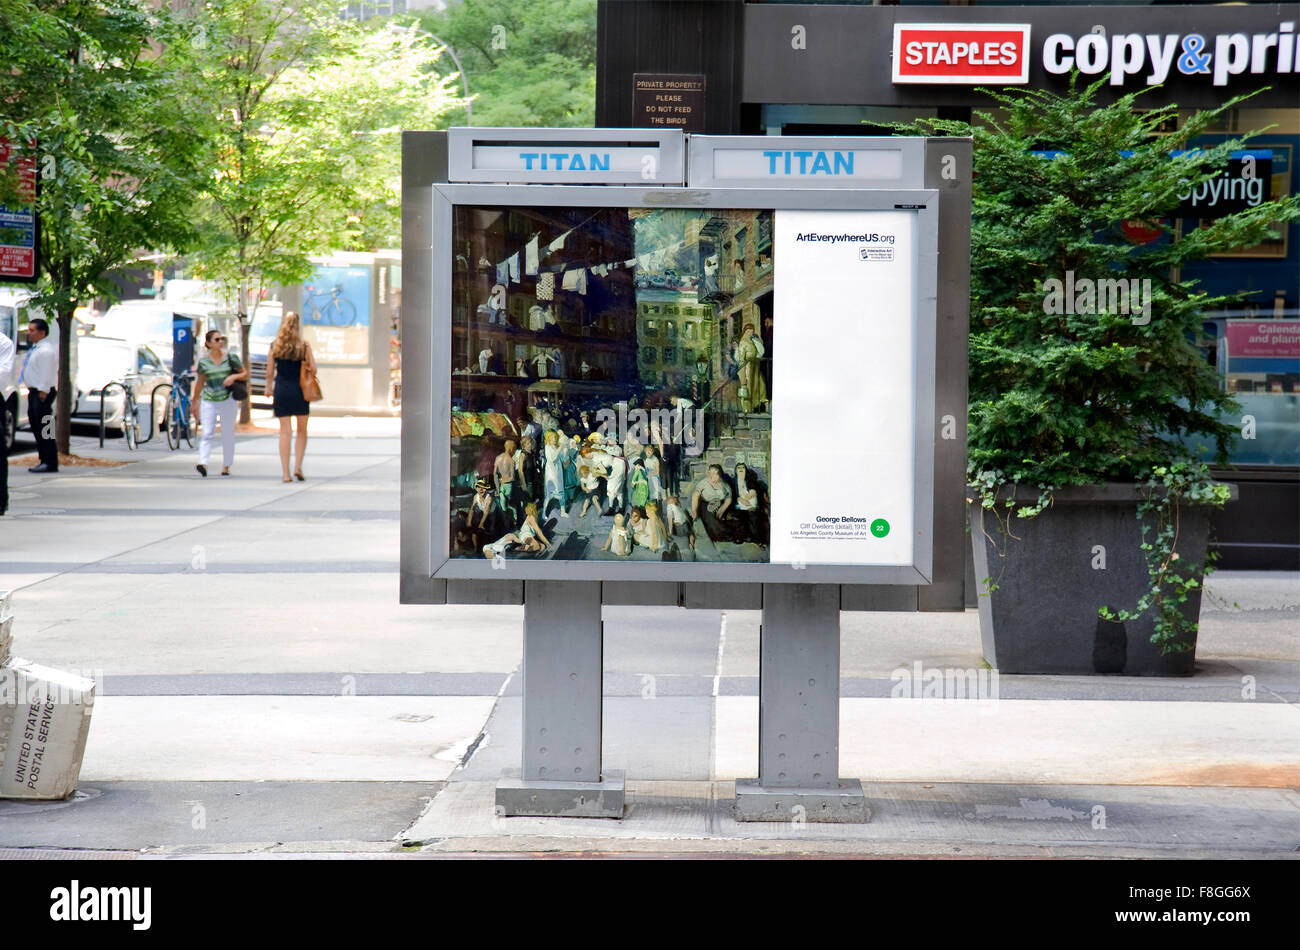 A George Bellows painting is reproduced on an outdoor advertising kiosk in New York City during the Art Everywhere event. Stock Photo